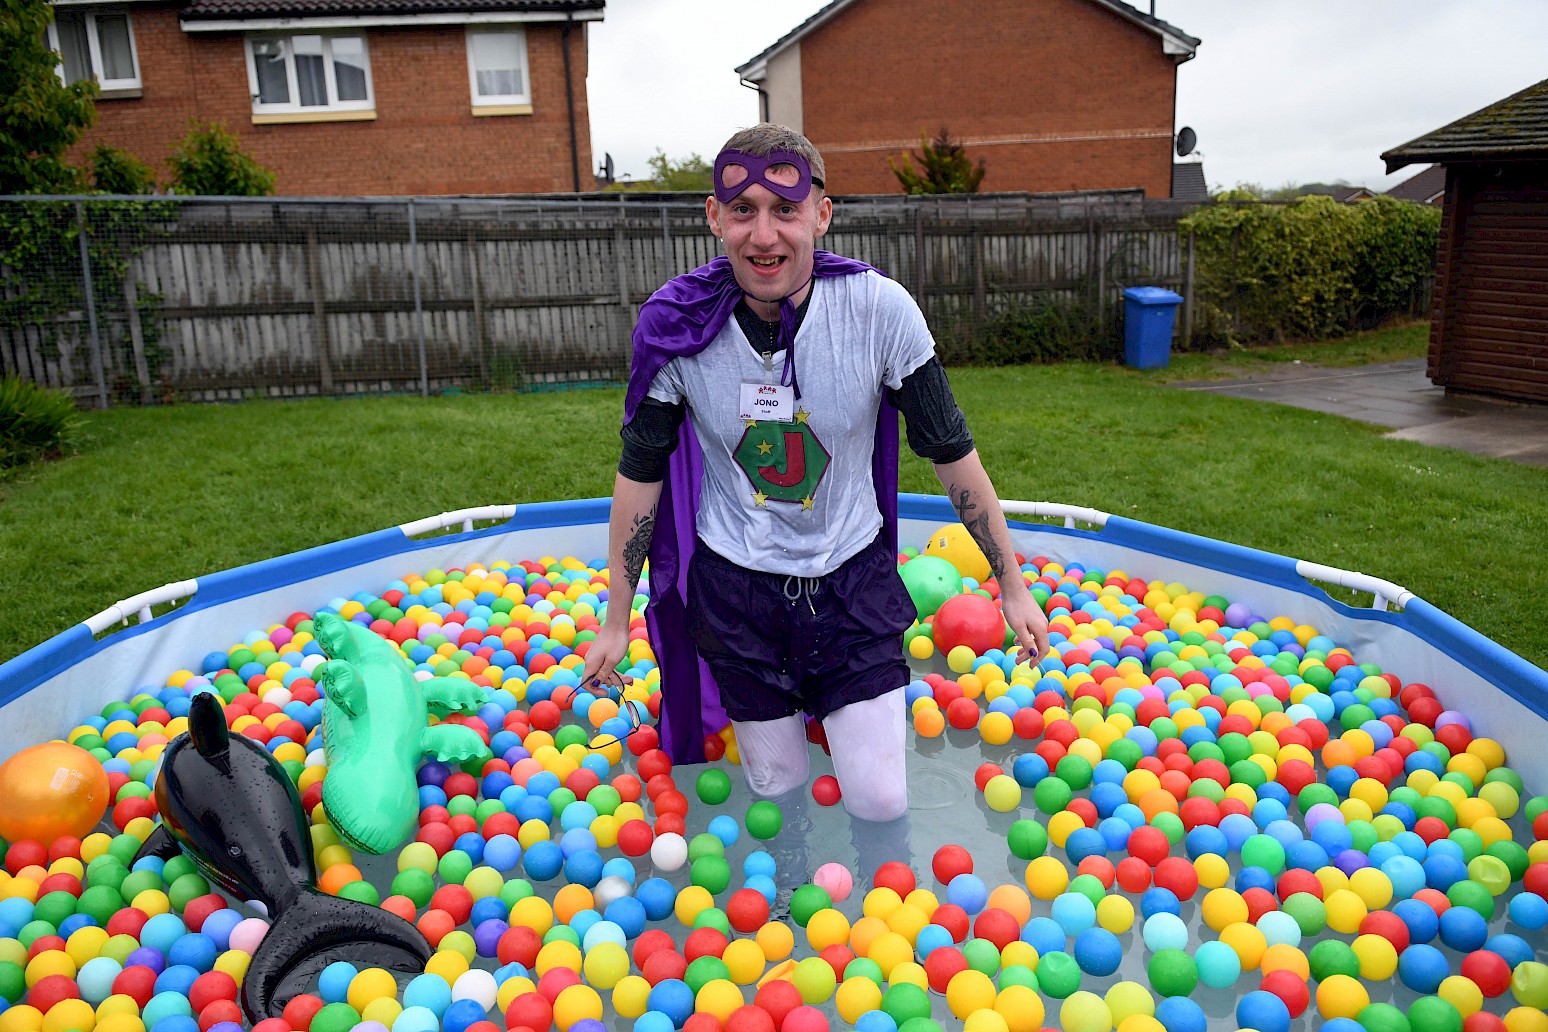 Jono outdoors in a paddling pool full of balls and inflatable toys